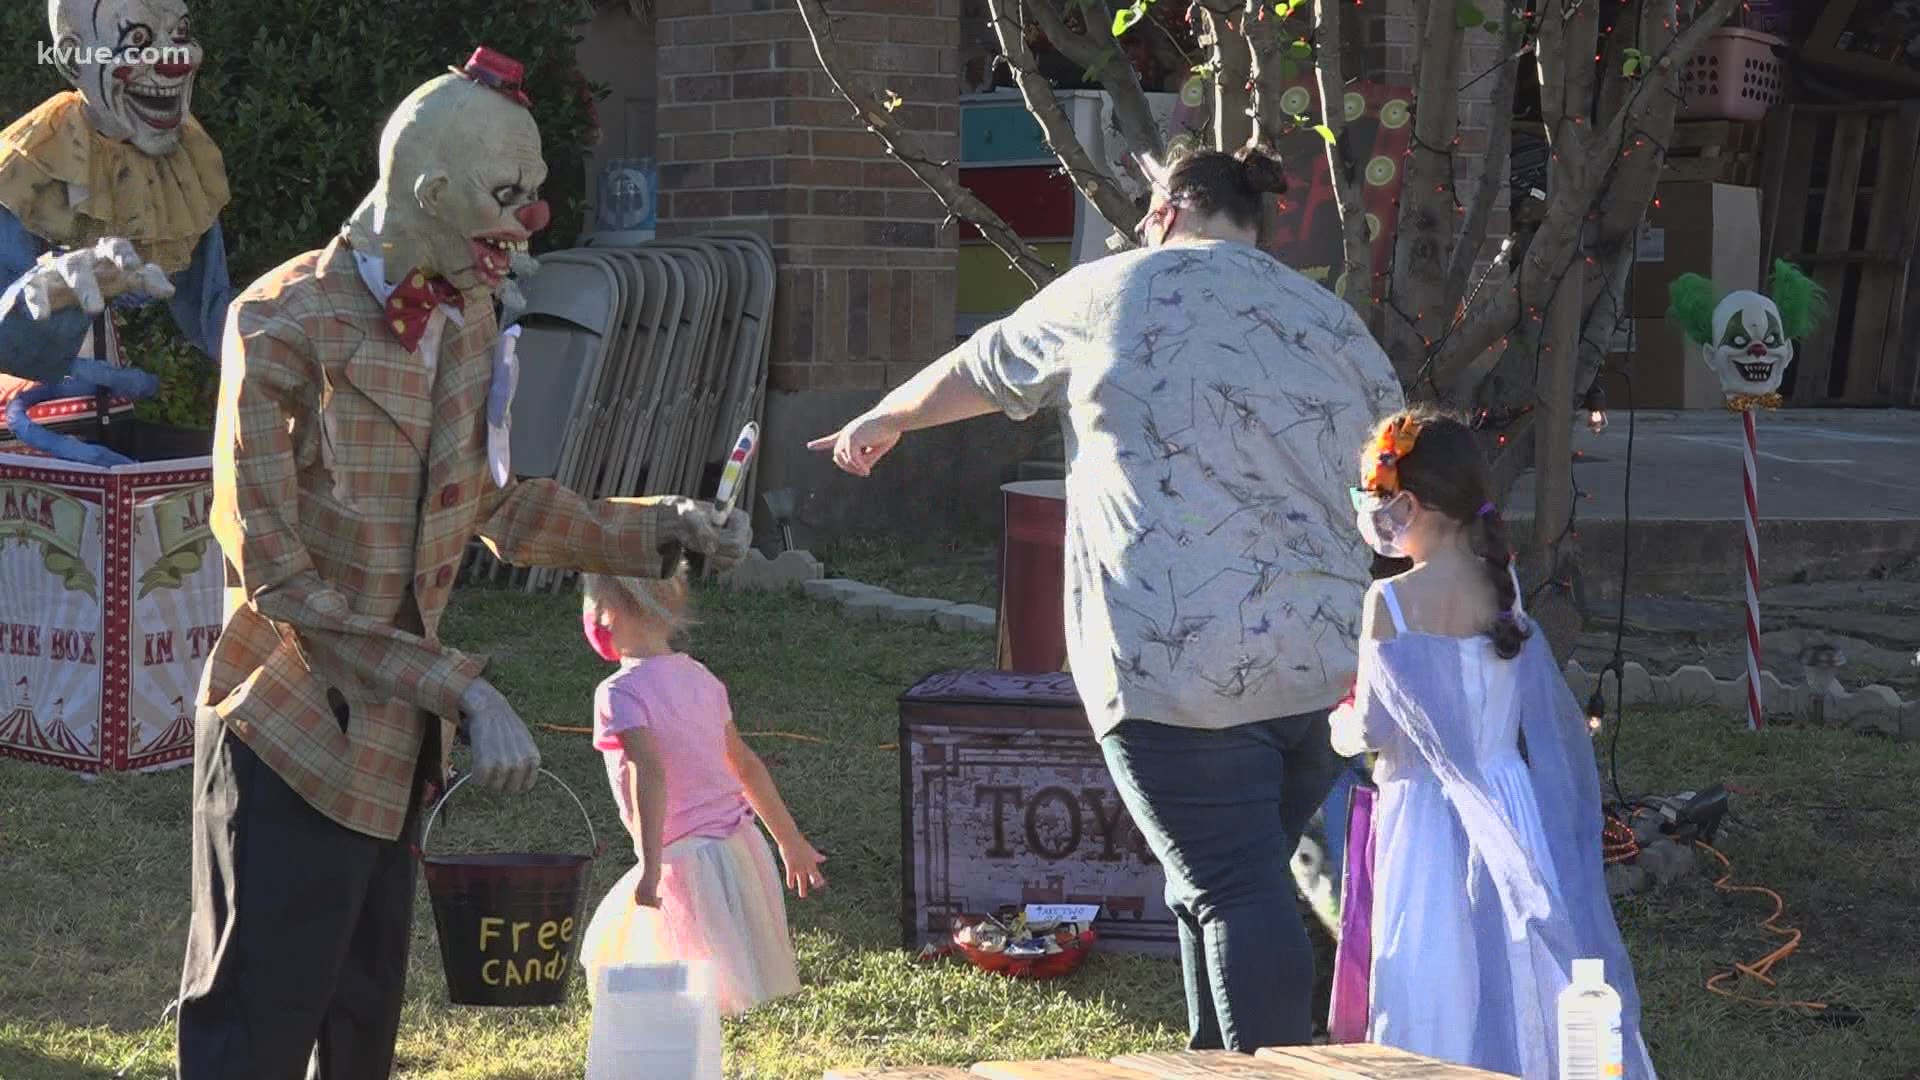 One Round Rock neighborhood had to get creative for Halloween this year amid the COVID-19 pandemic. The neighbors turned the holiday into a block party.